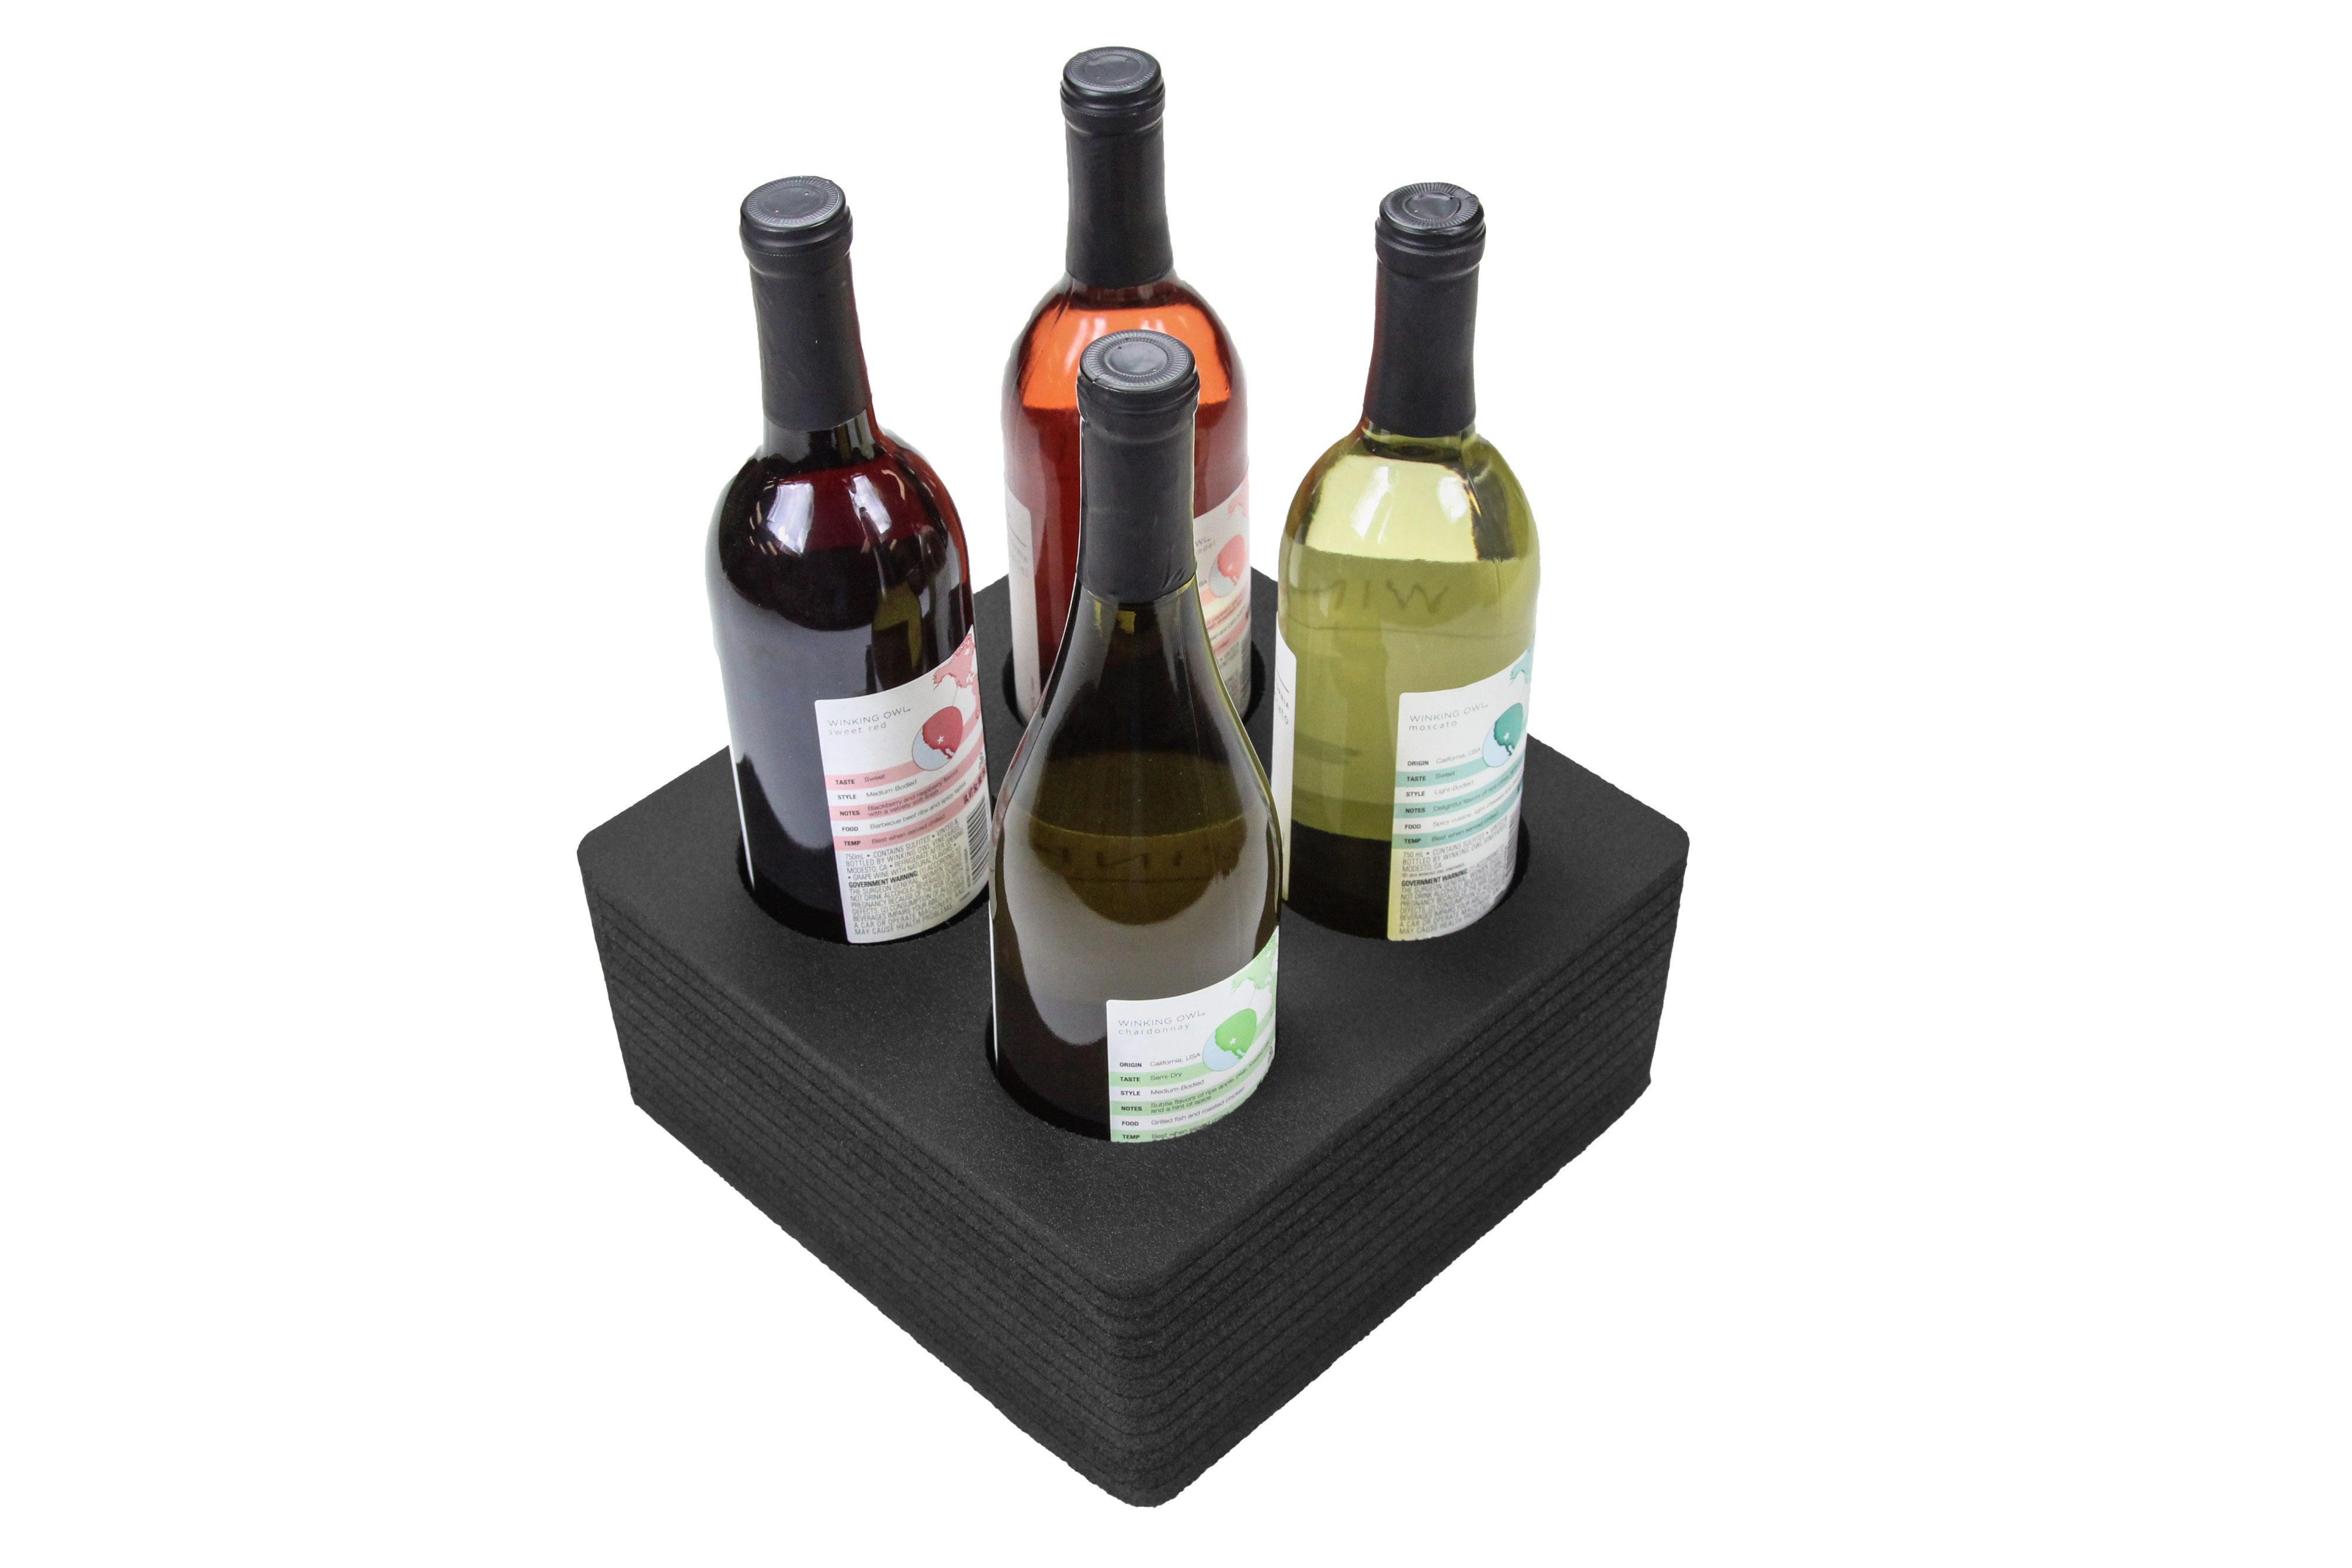 Wine Holder Durable Foam Organizer Transport Protector Packer Bottle Car Truck SUV Van Seat Travel Protection 9.5 x 9.5 x 4 Inches Holds 4 Bottles